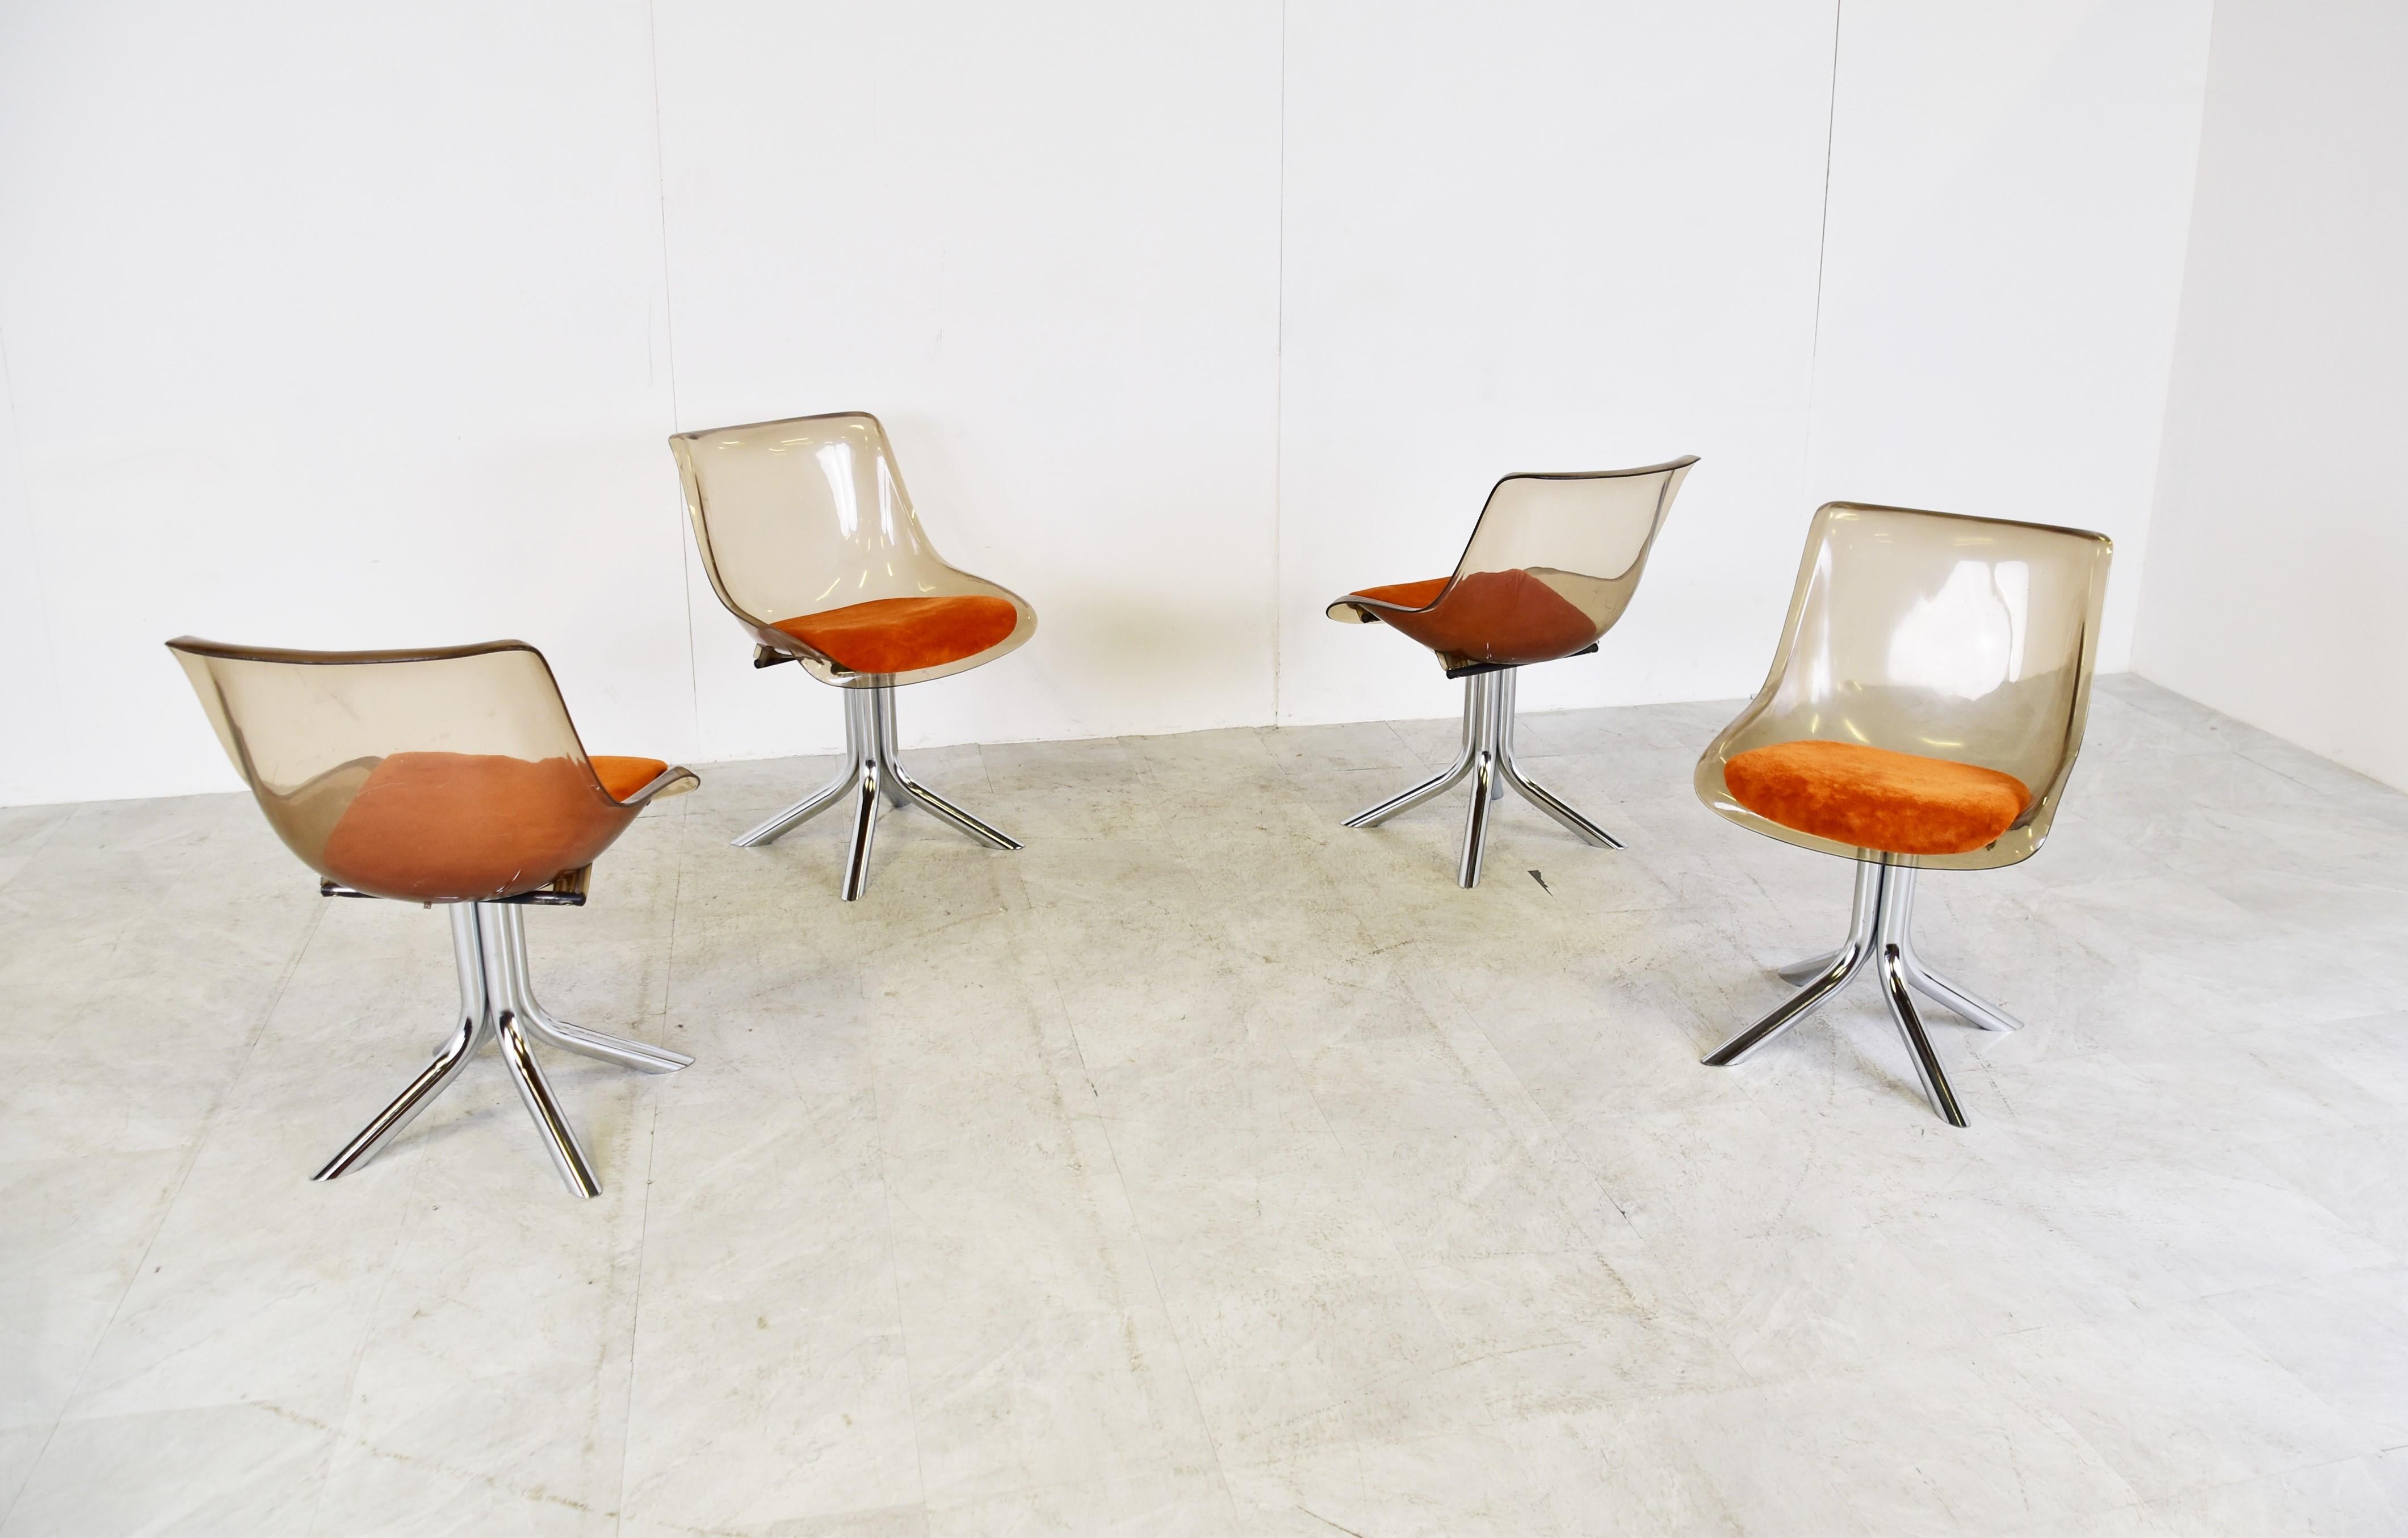 Fabric Space Age Plexiglass Chairs, 1970s